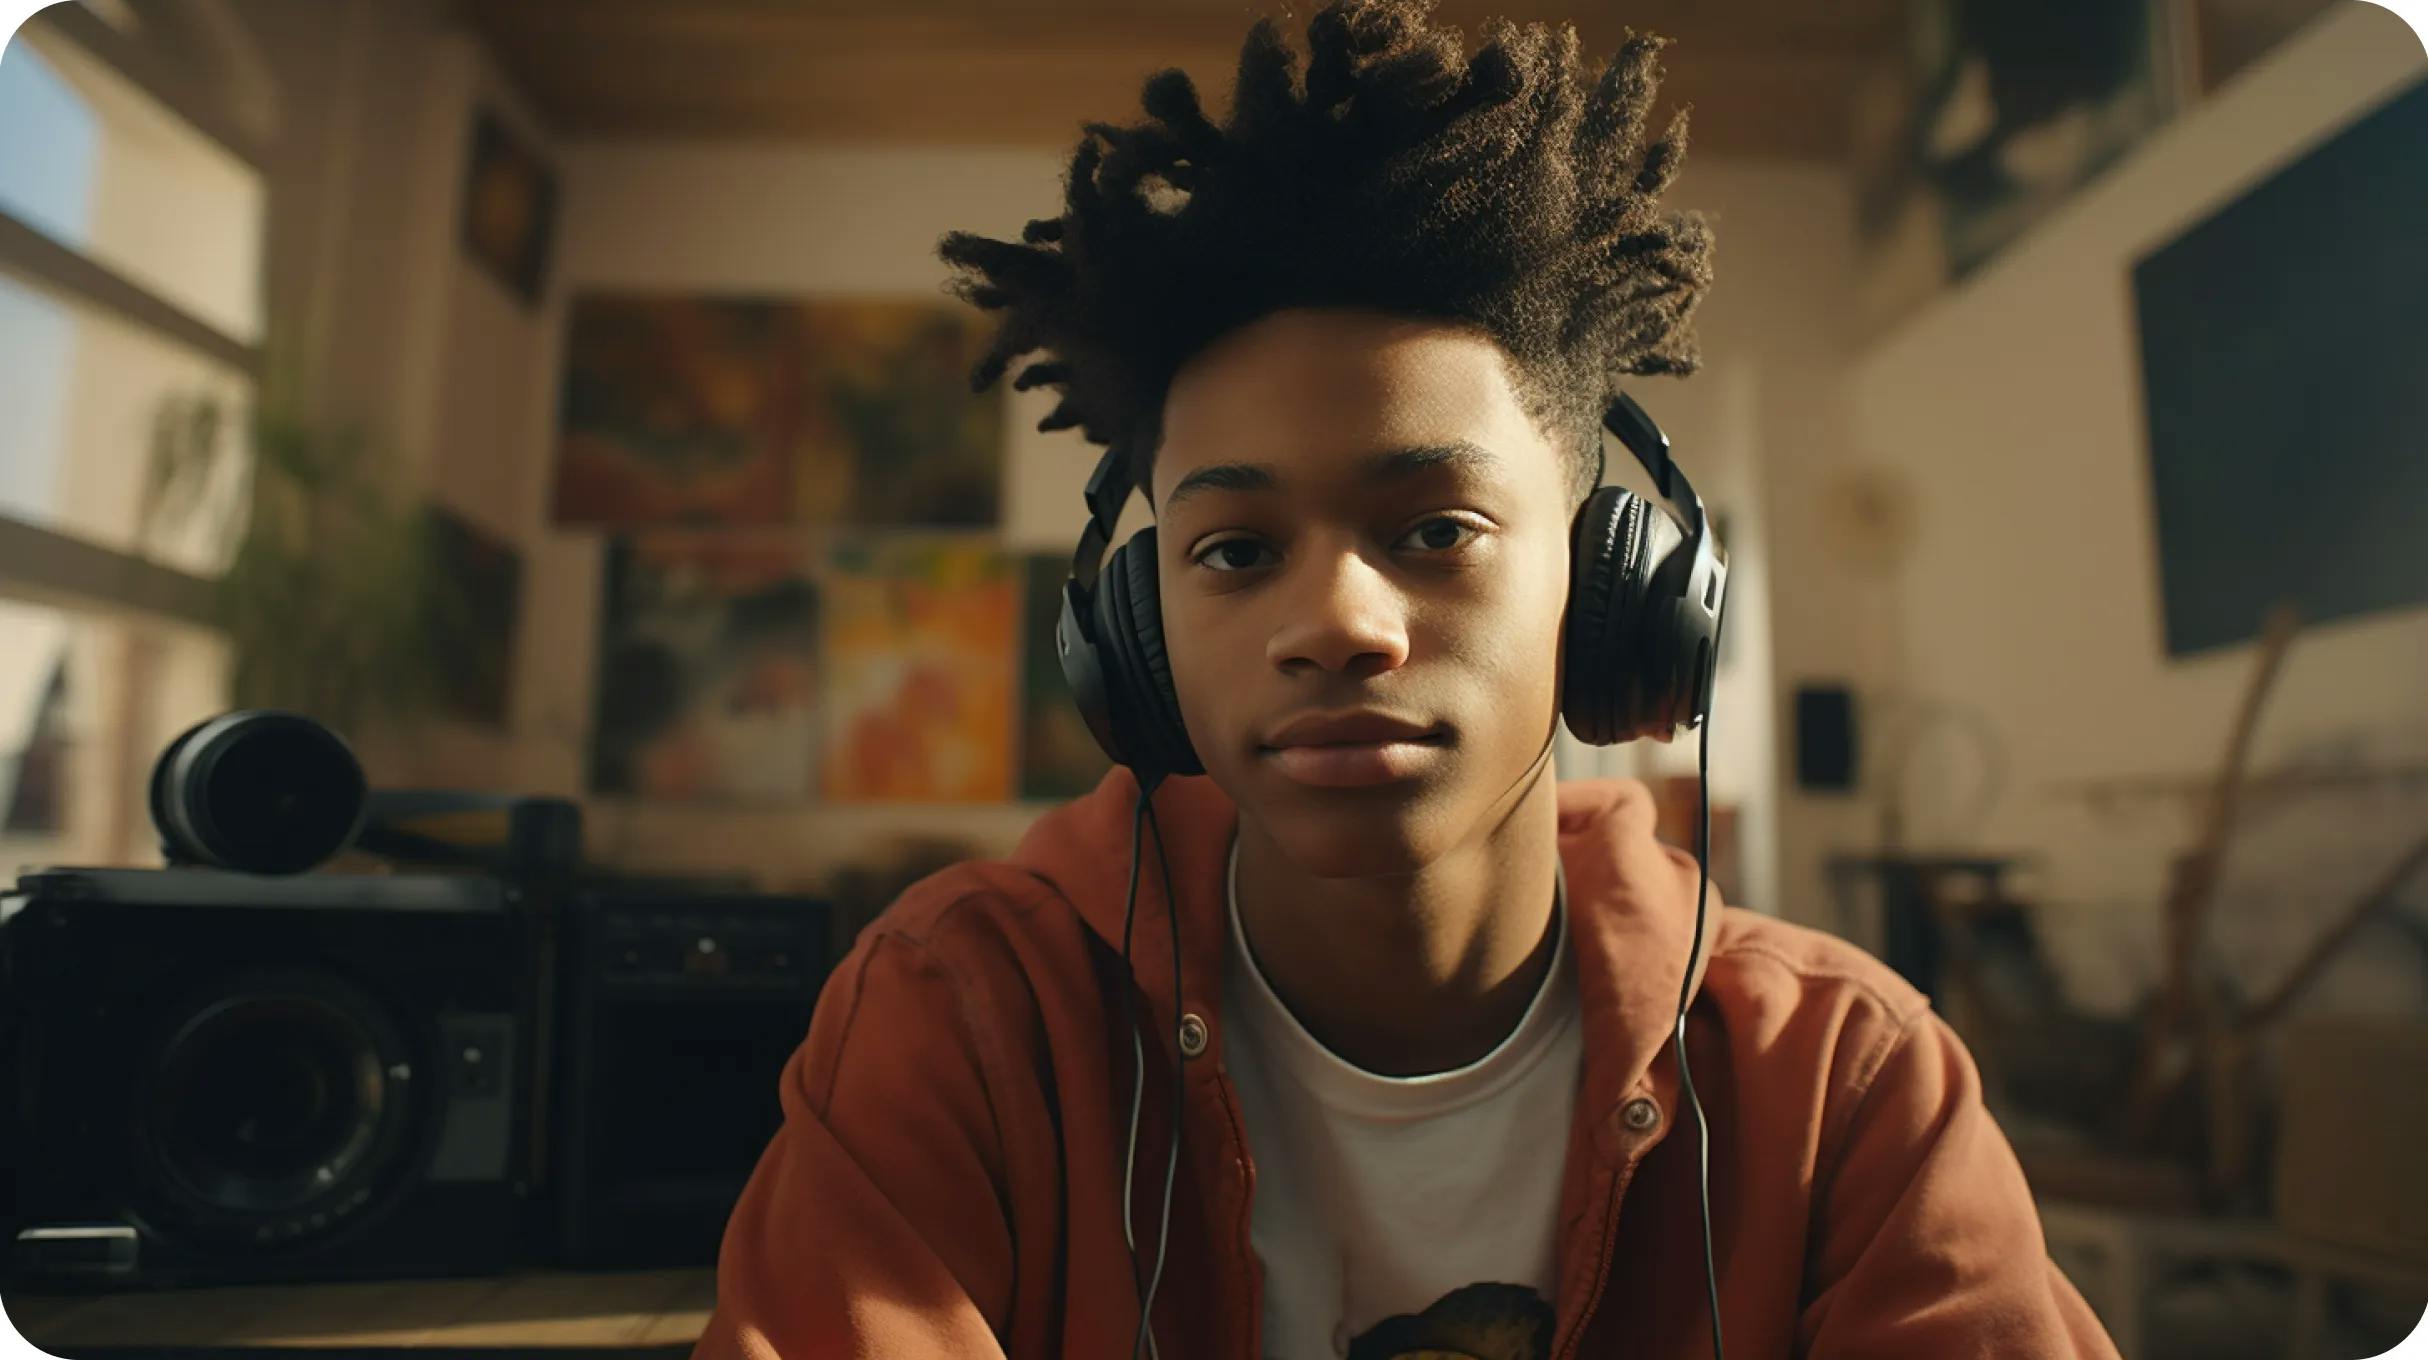 A young black boy with a headphones looking at the camera